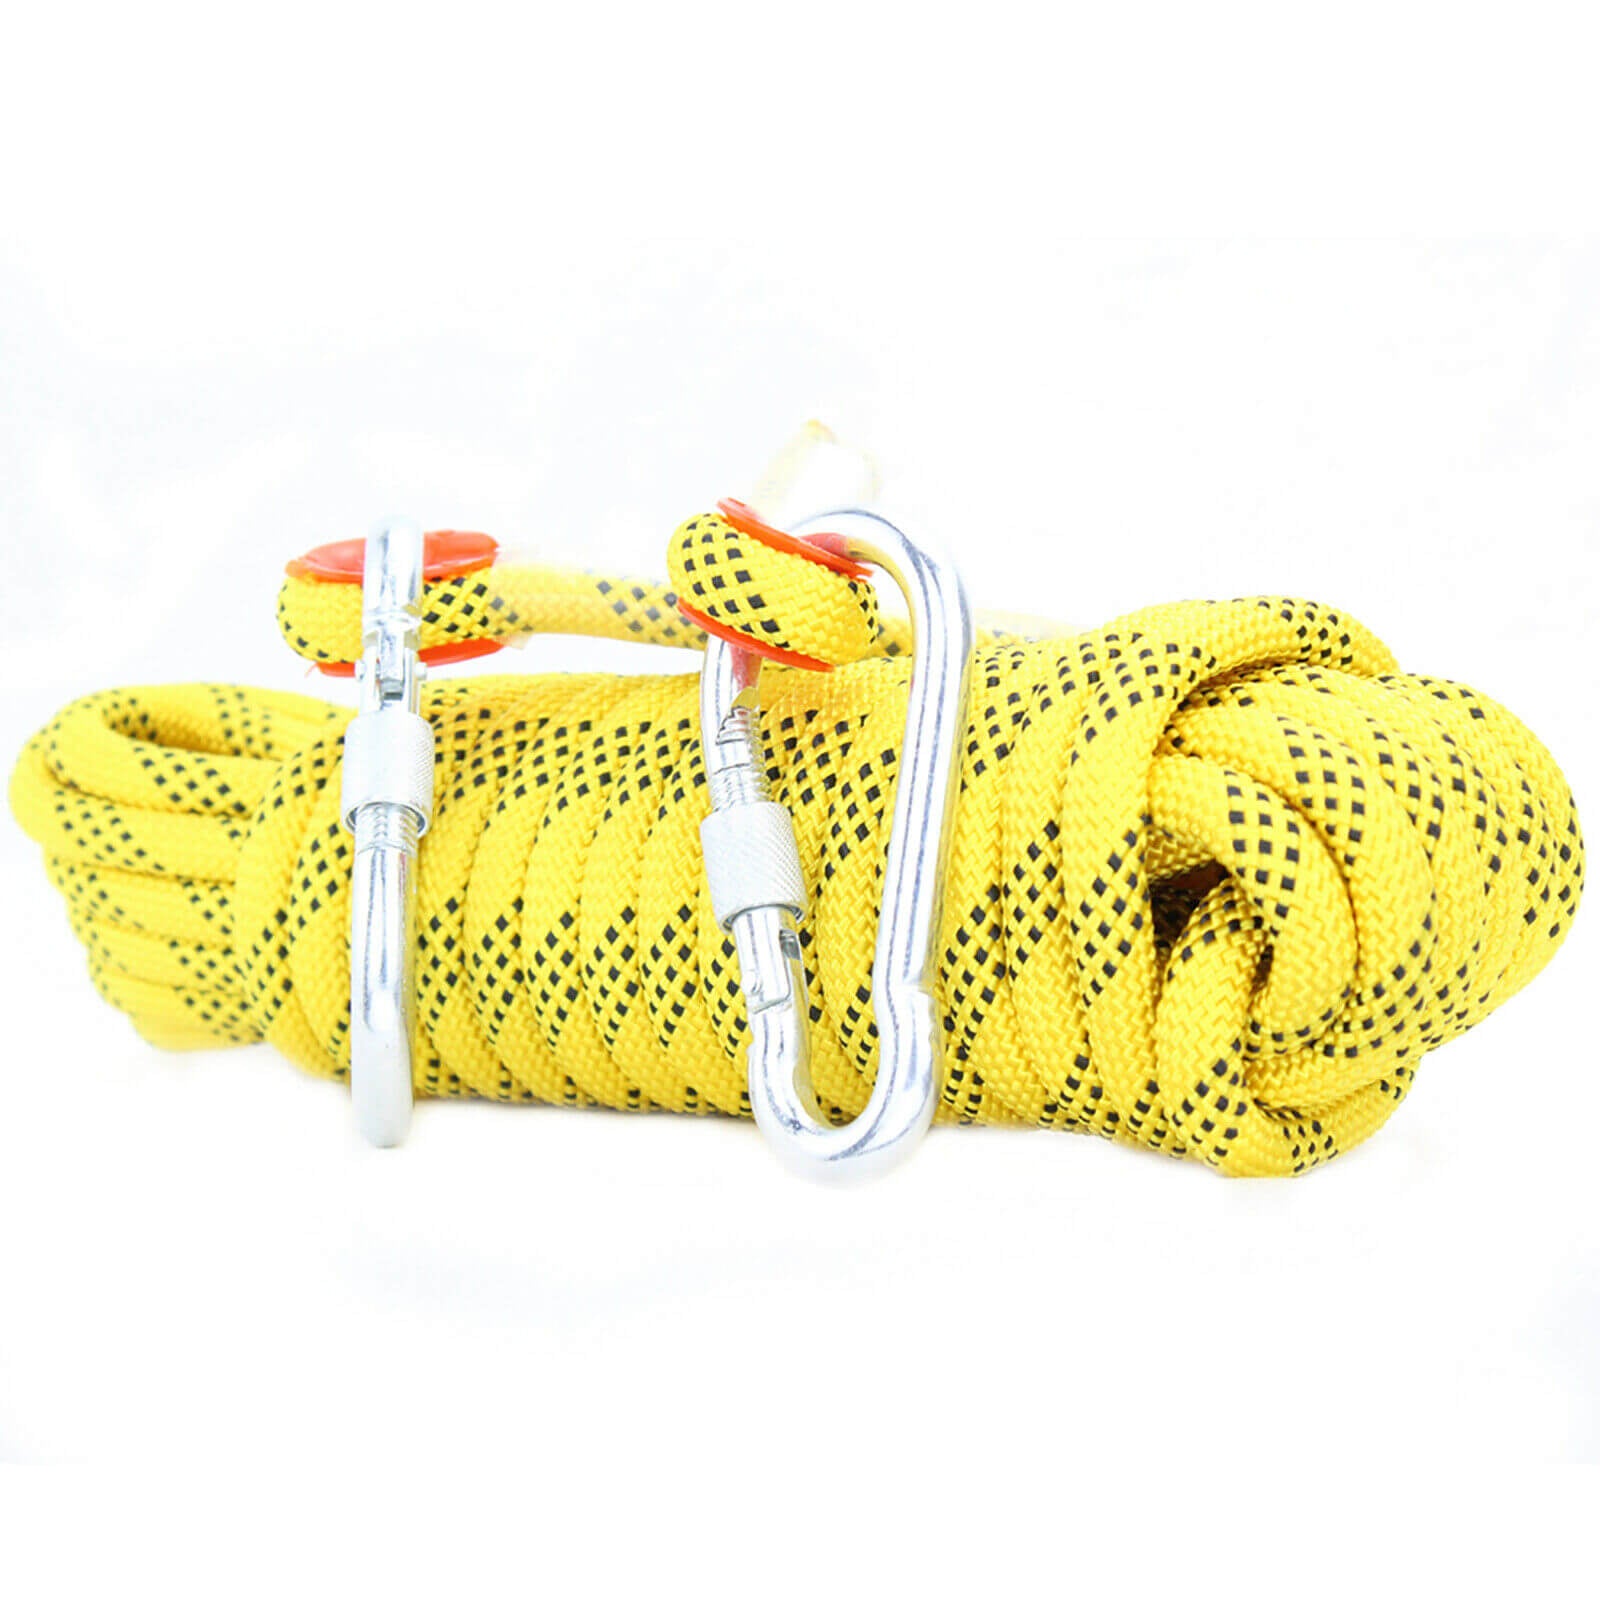 10mm Safety Outdoor Climbing Rope - BCBMALL